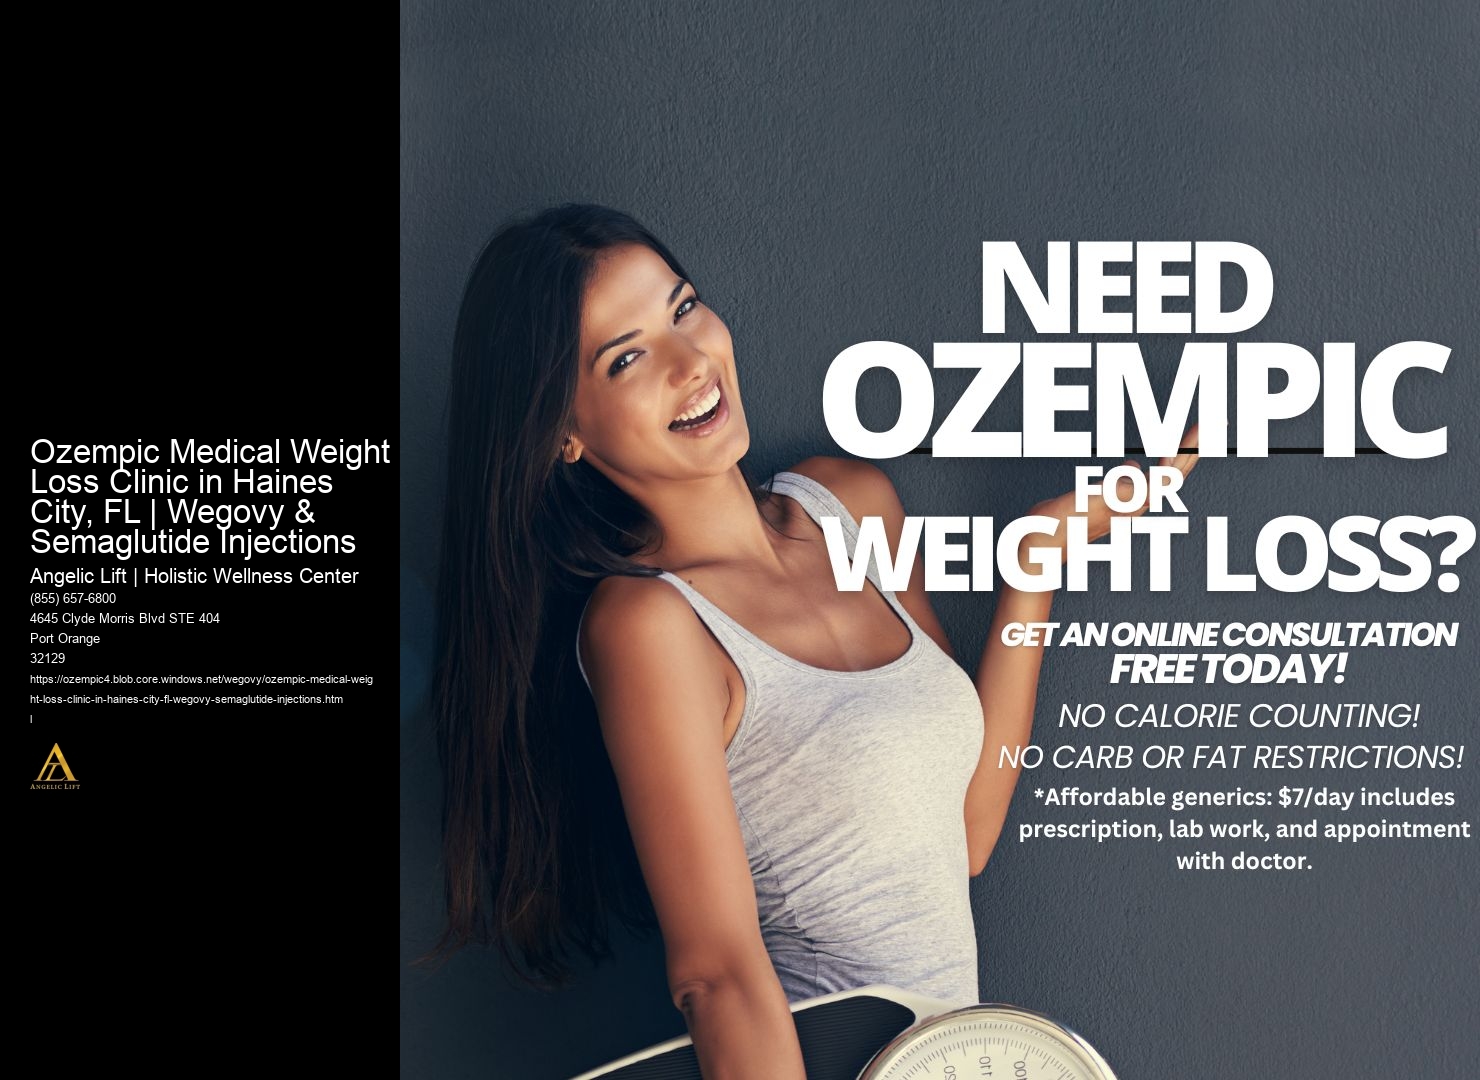 Ozempic Medical Weight Loss Clinic in Haines City, FL | Wegovy & Semaglutide Injections